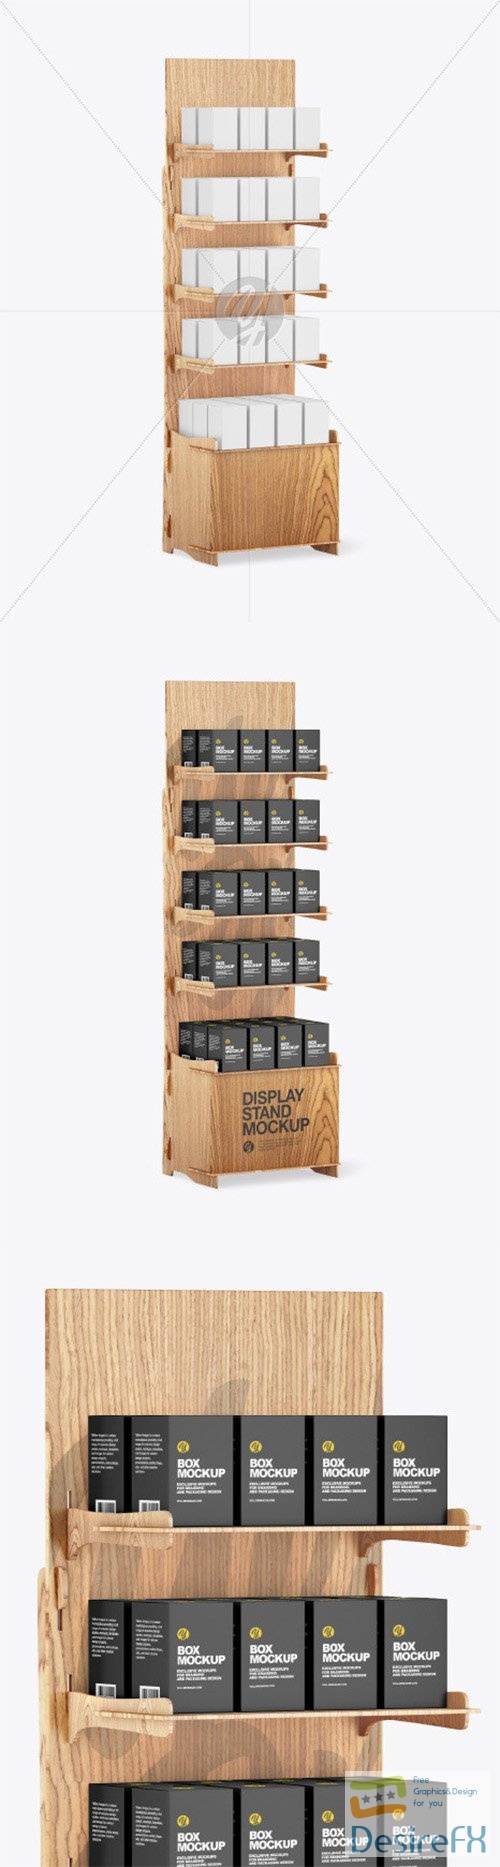 Wooden Display Stand w/ Boxes Mockup 86144 TIF